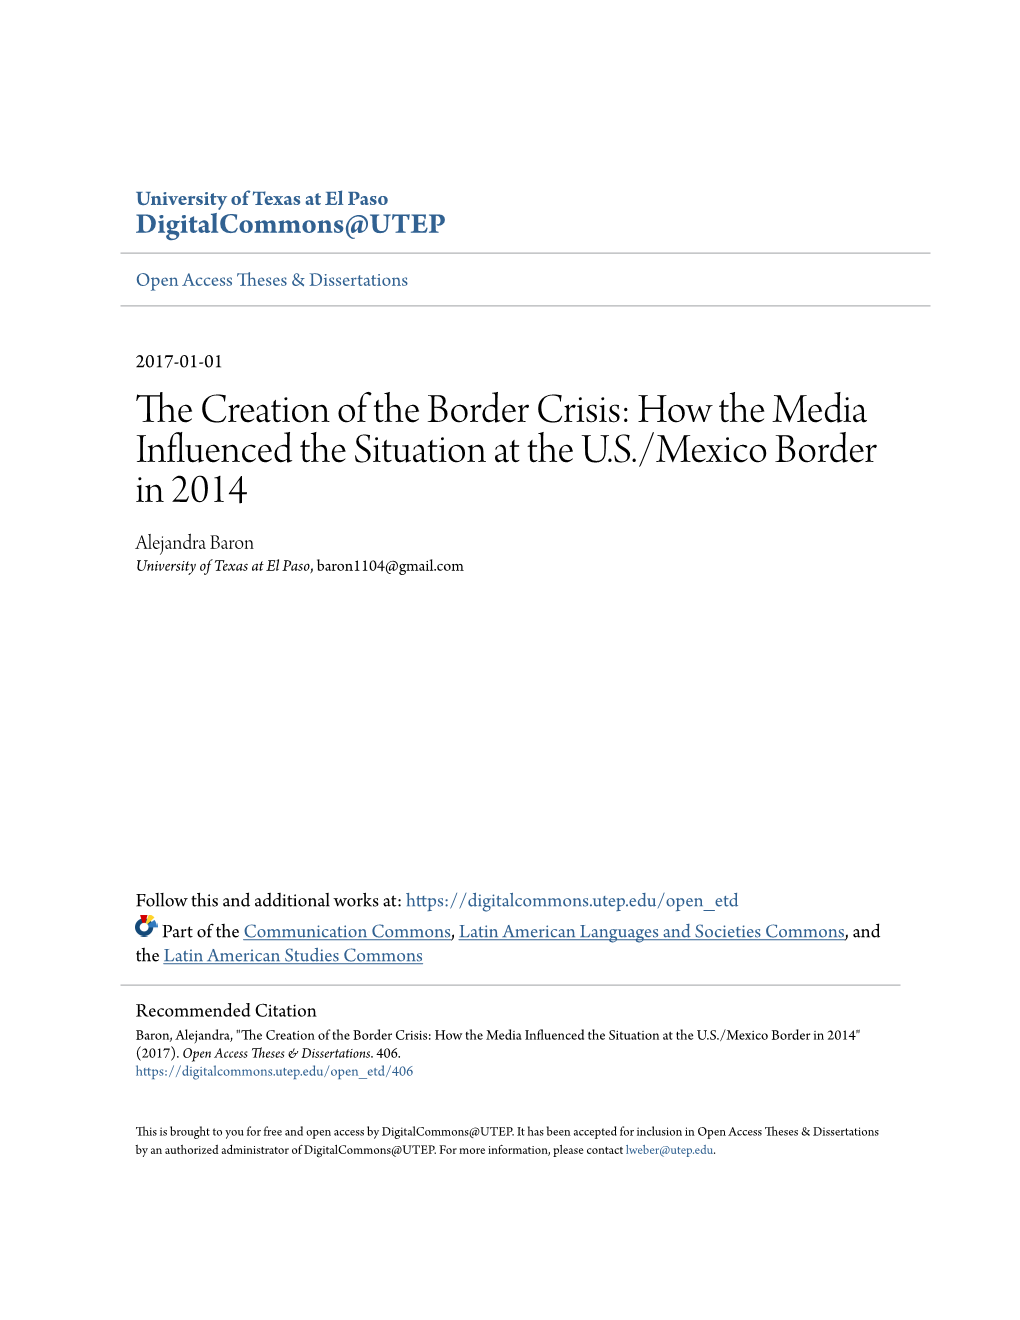 The Creation of the Border Crisis: How the Media Influenced the Situation at the U.S./Mexico Border in 2014